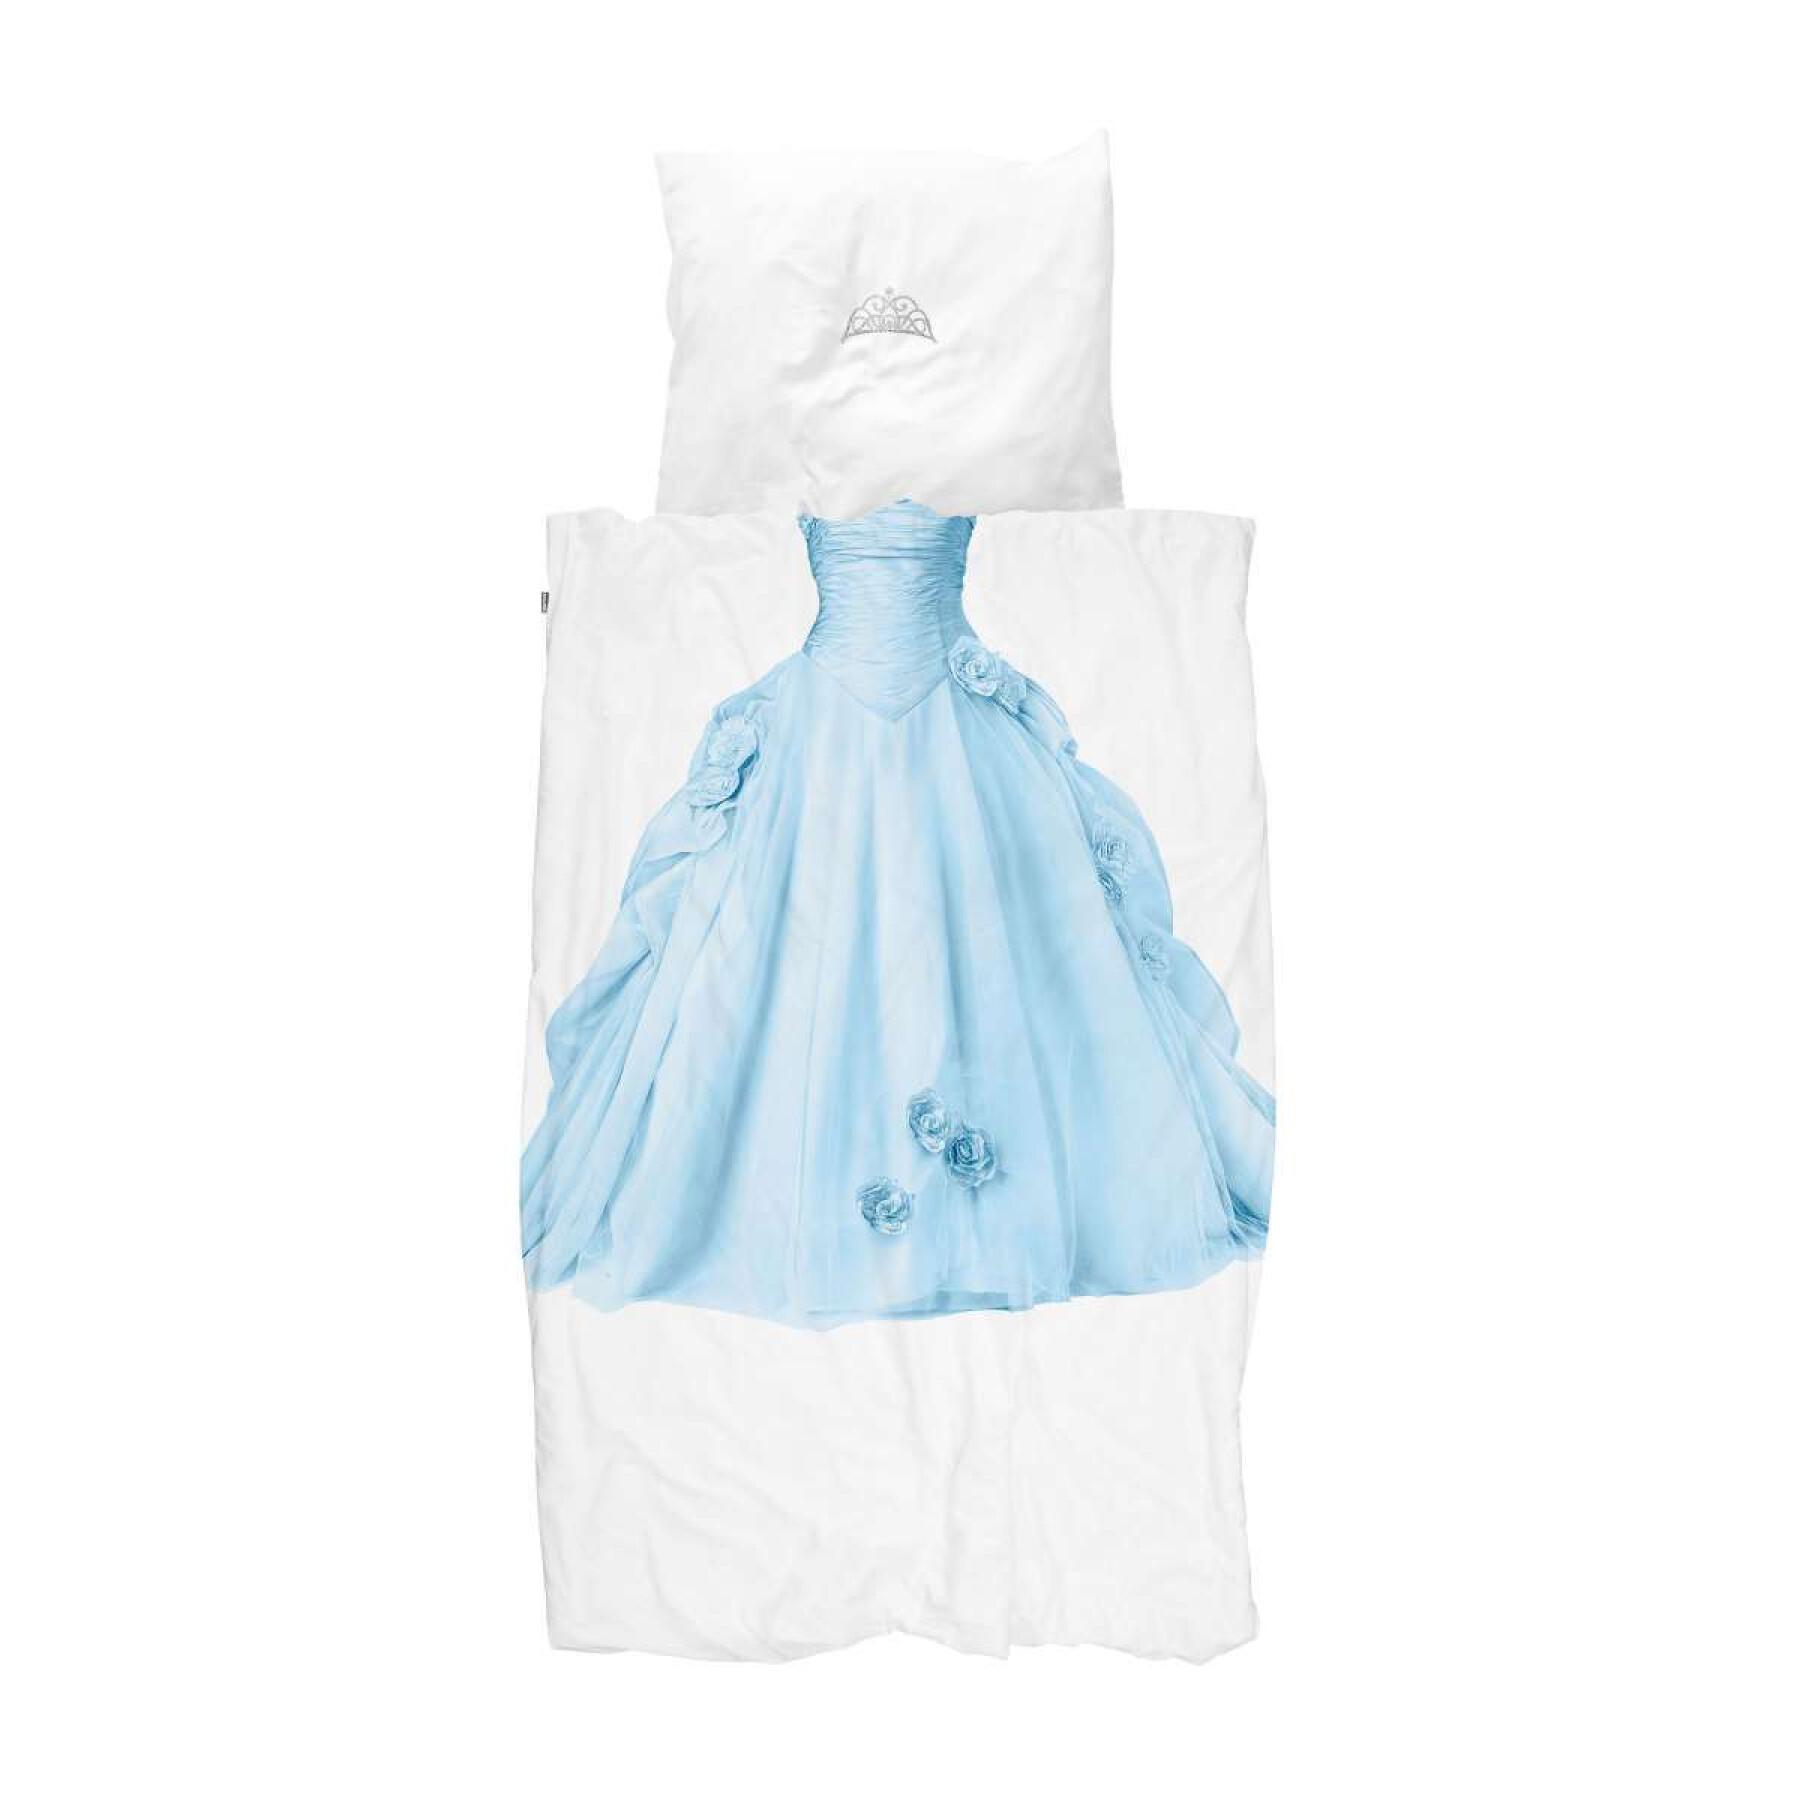 Comforter cover and pillowcase for children Snurk Princess